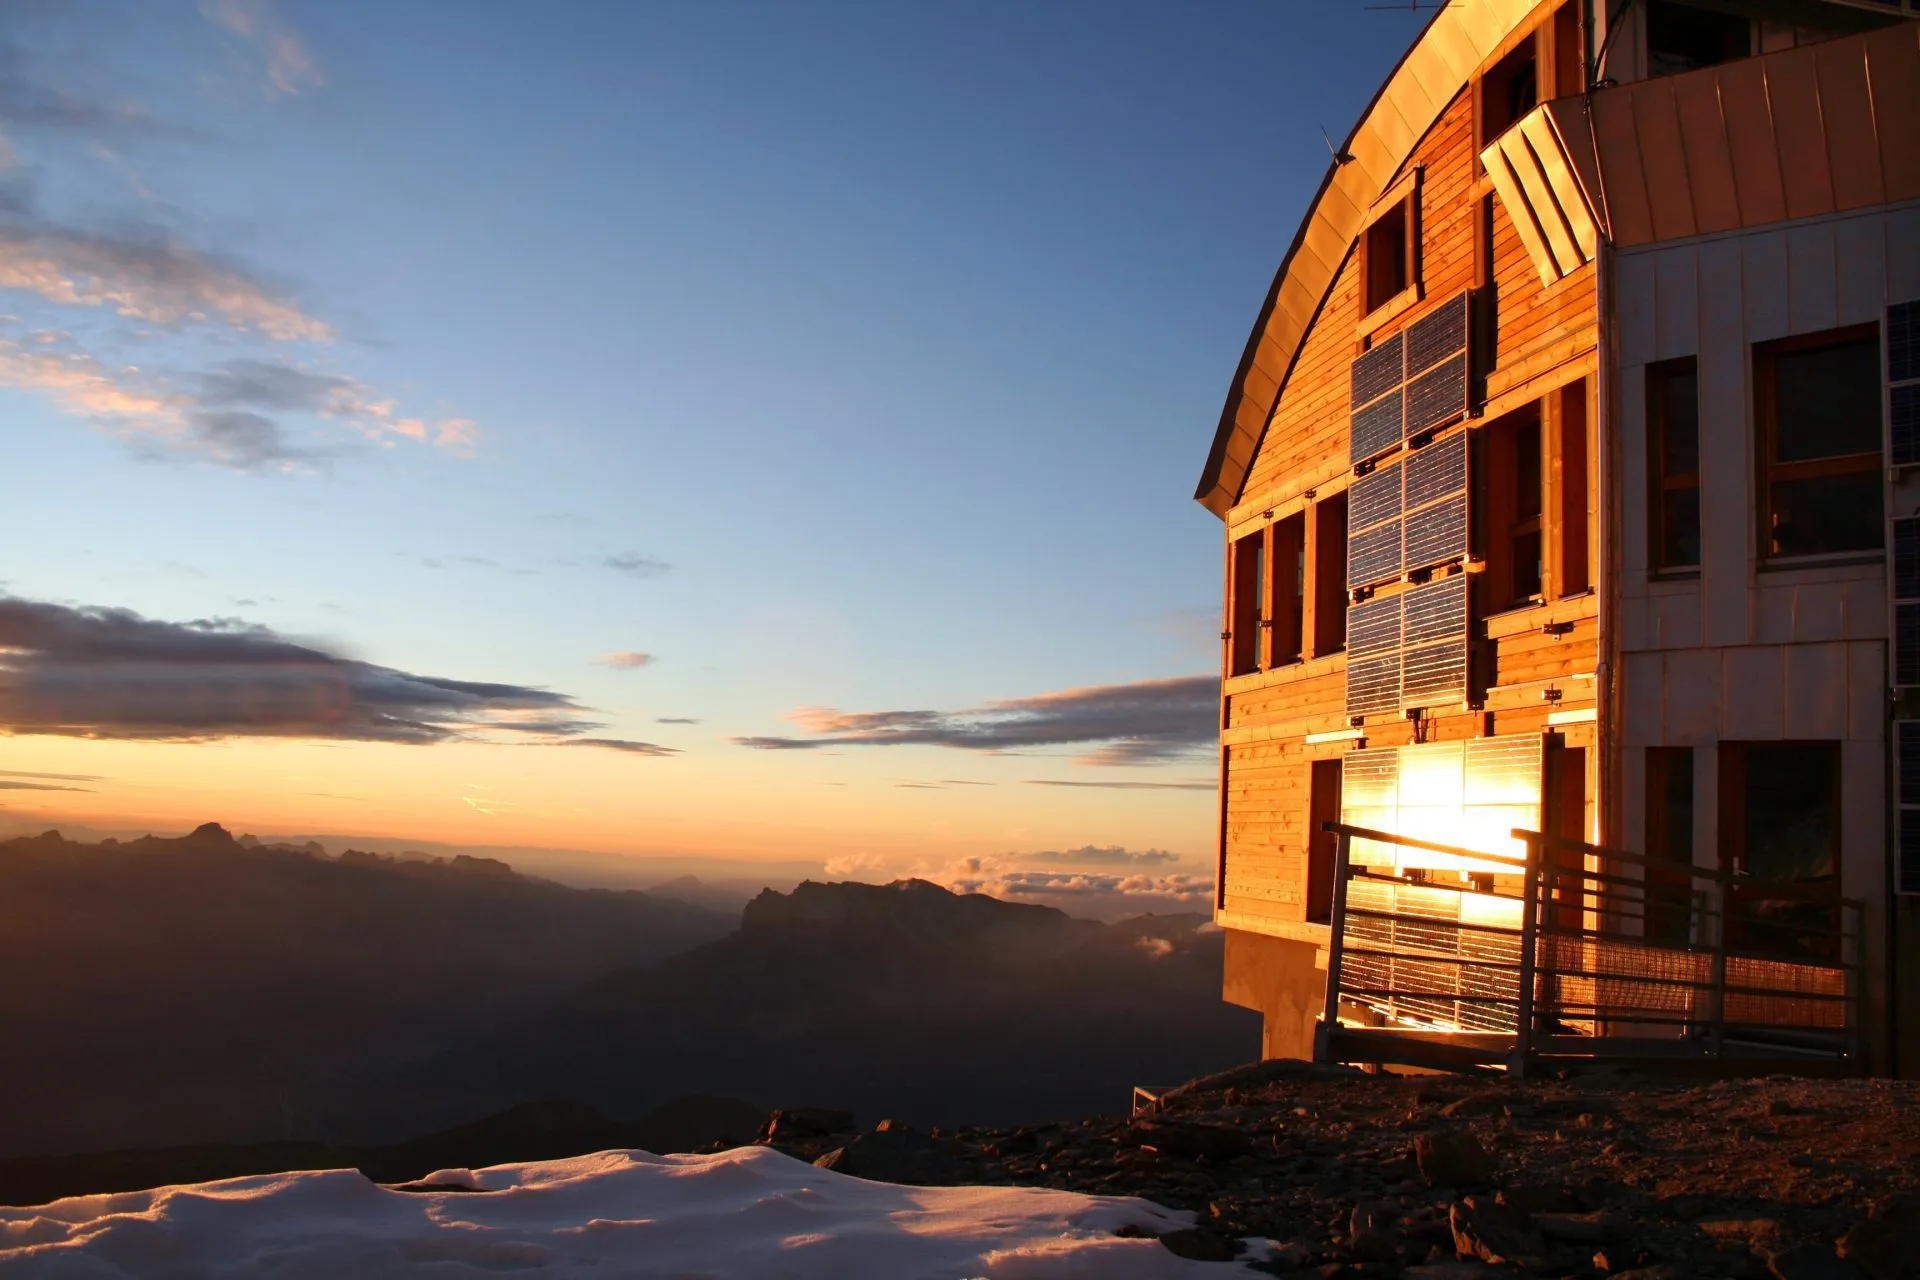 tete rousse hut at sunset scaled